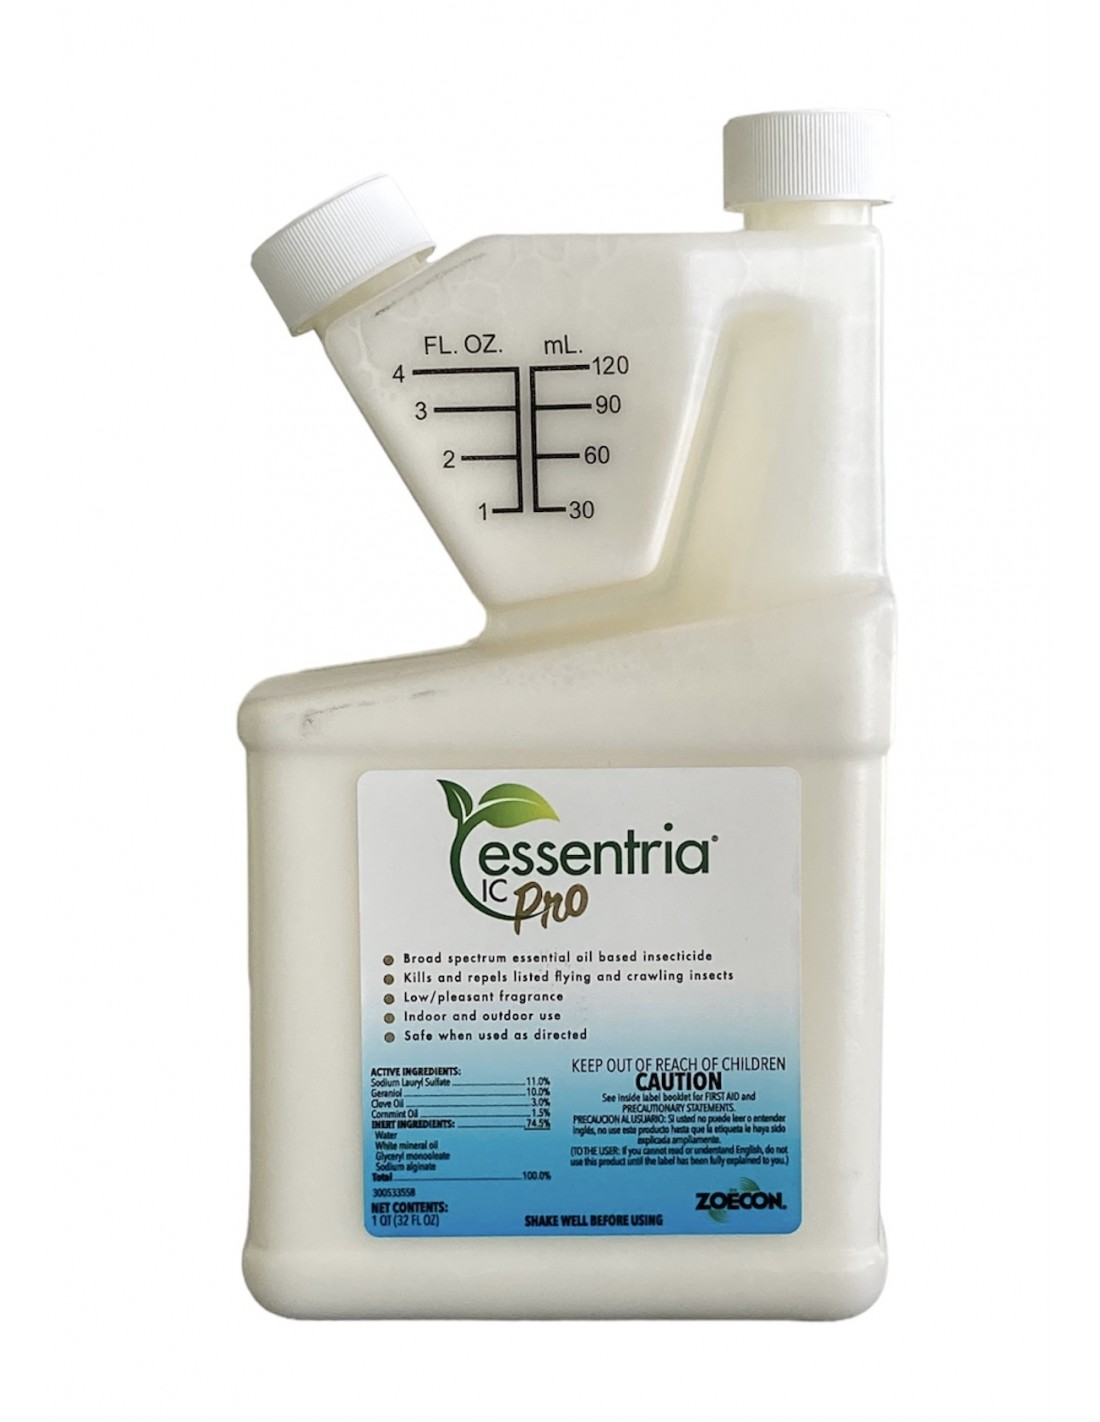 https://www.epestcontrol.com/2326-thickbox_default/essentria-ic-pro-insecticide-concentrate-32-oz.jpg